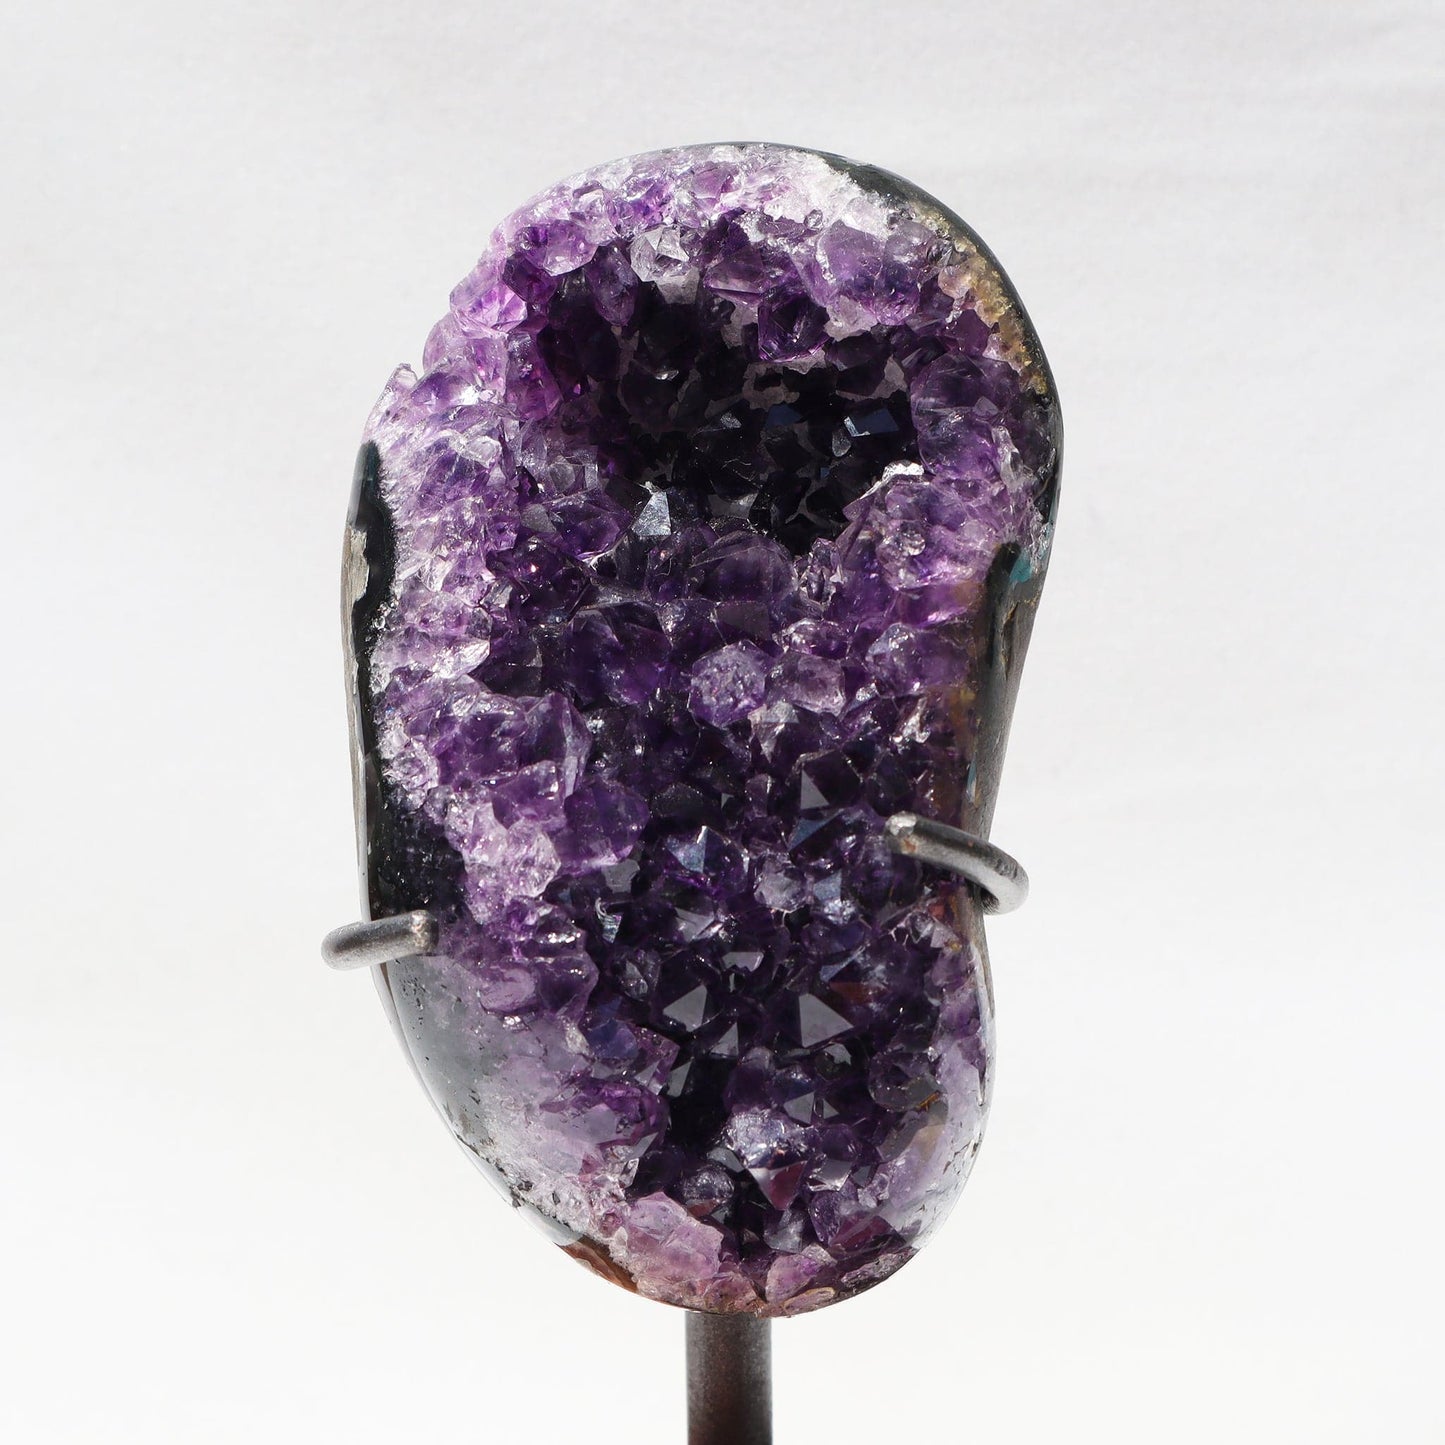 On Stand Rustic Geode, Mineral Home Decor  - Deepest Earth